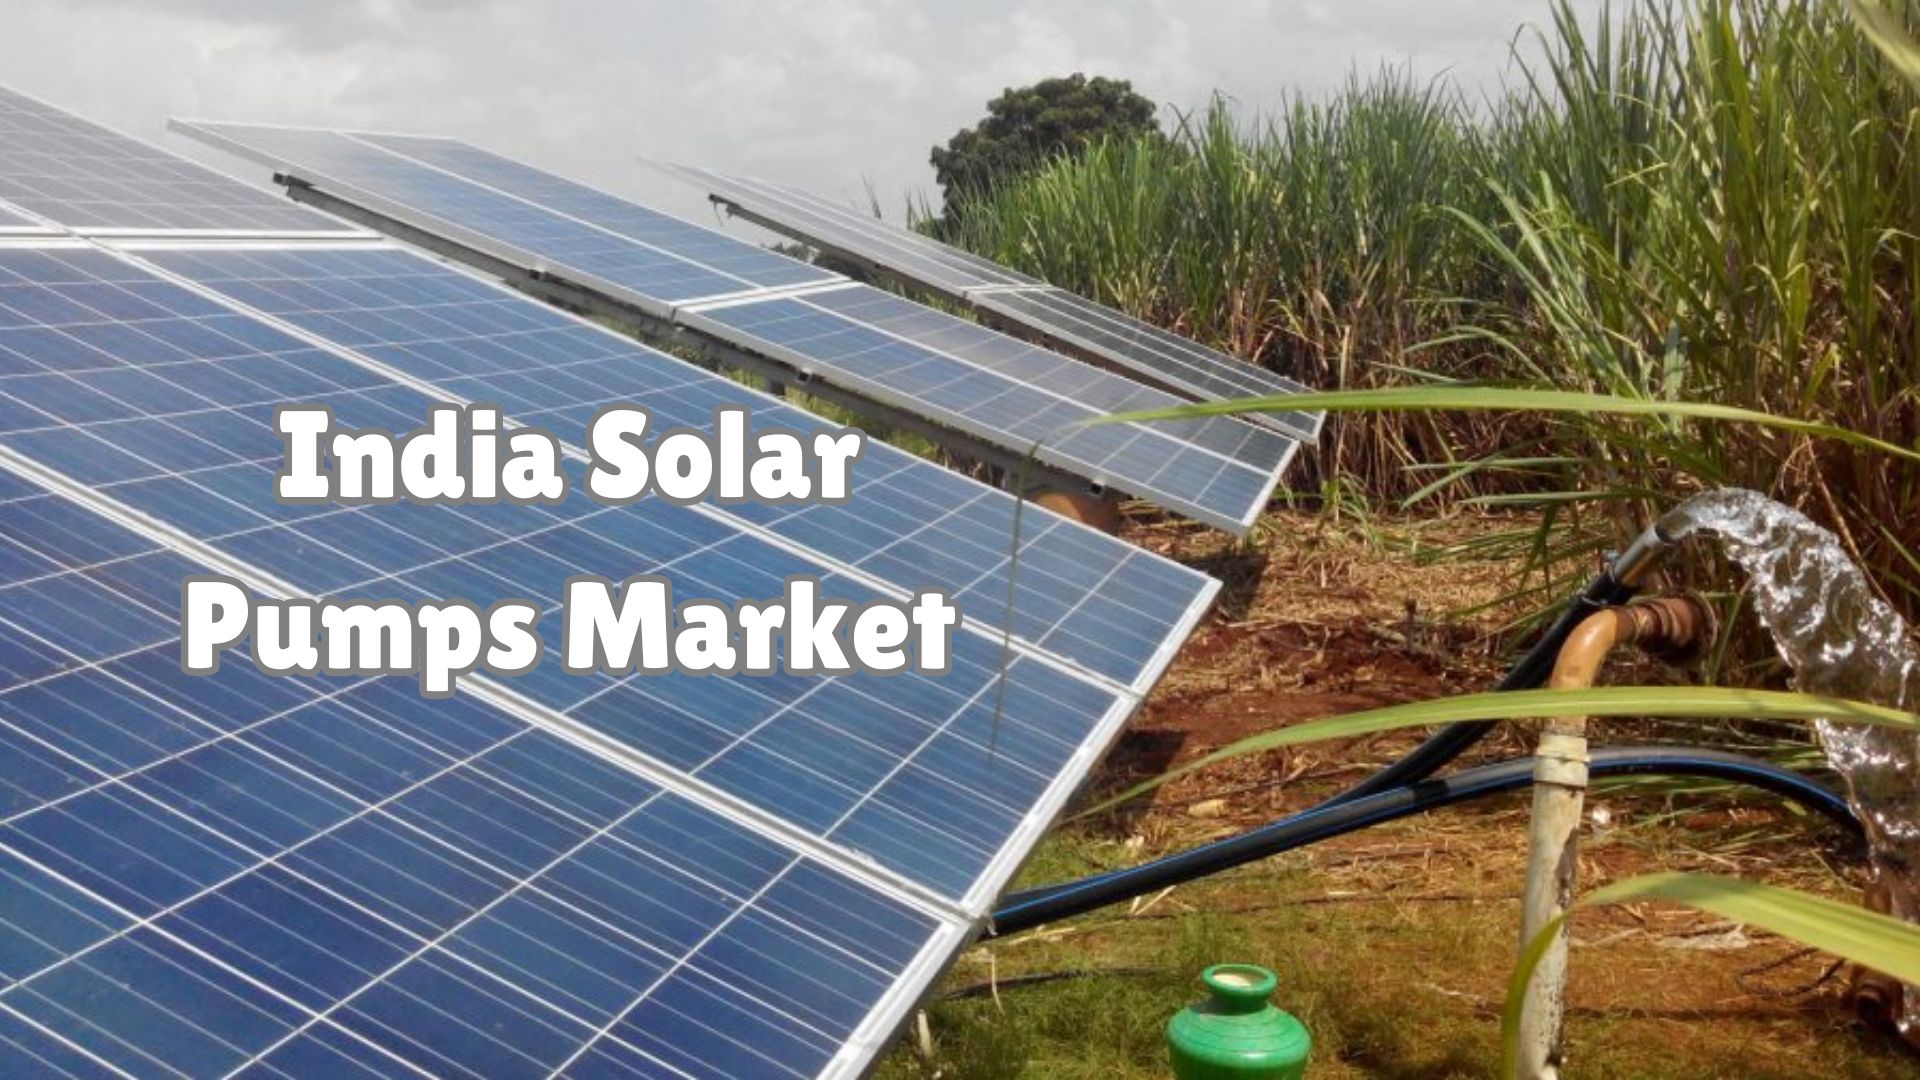 India Solar Pumps Market Trends: Analyzing Industry Dynamics